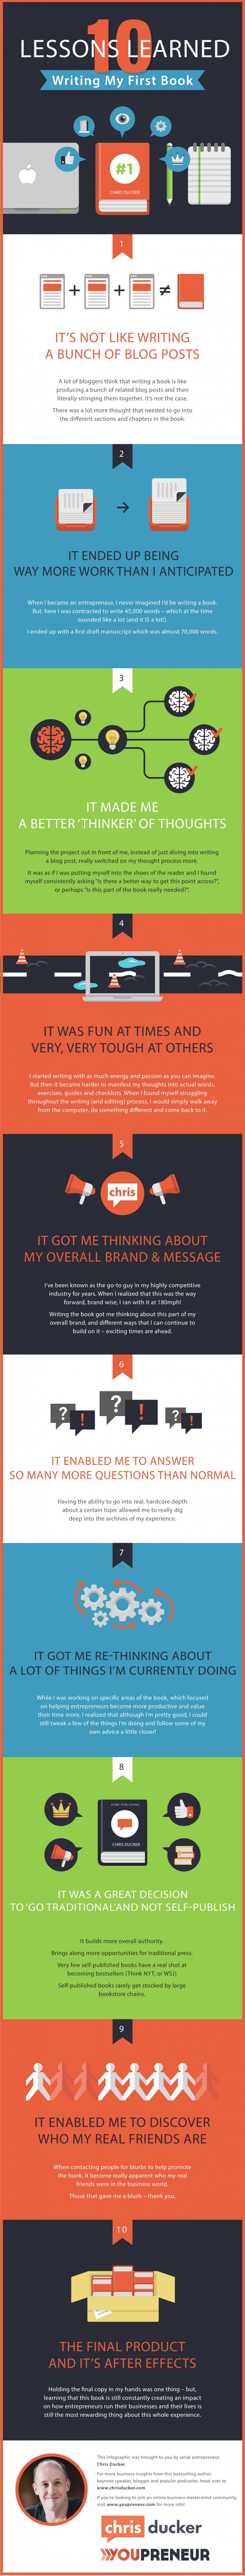 CHRIS-INFOGRAPHIC 6-5 (1) copy-page-001